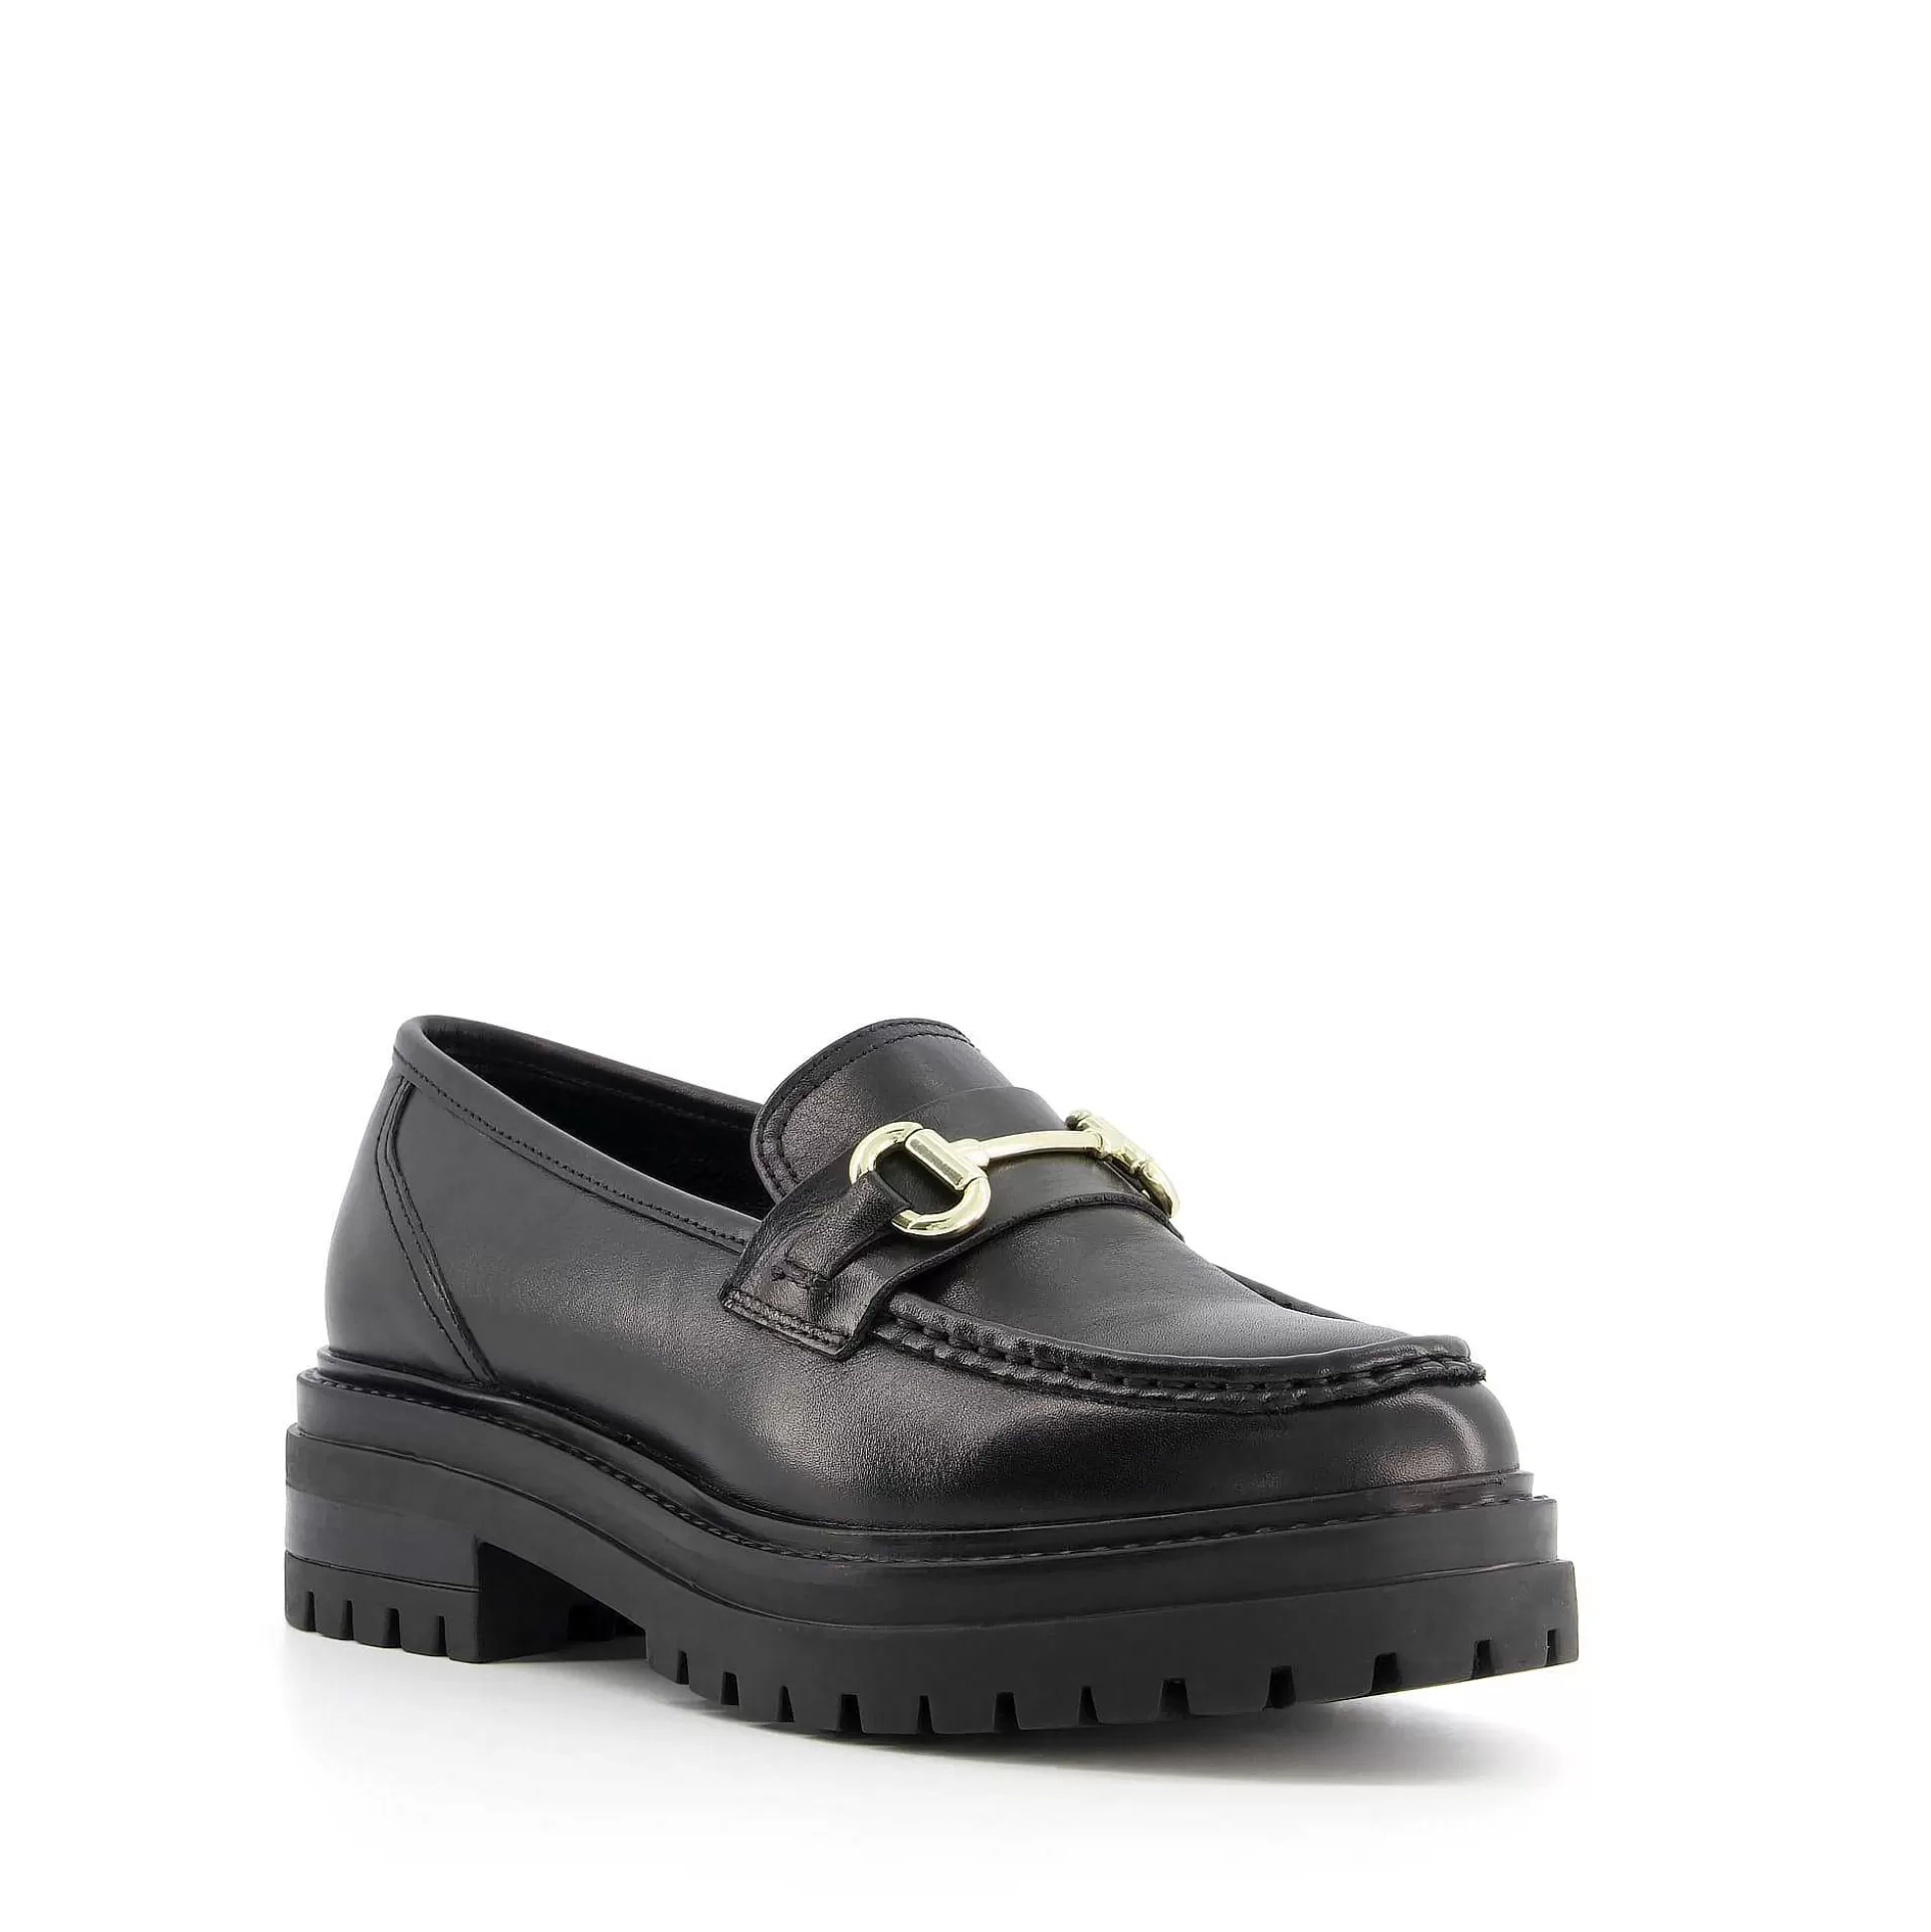 Dune London GALLAGHER - BLACK-Women Flat Shoes | Loafers